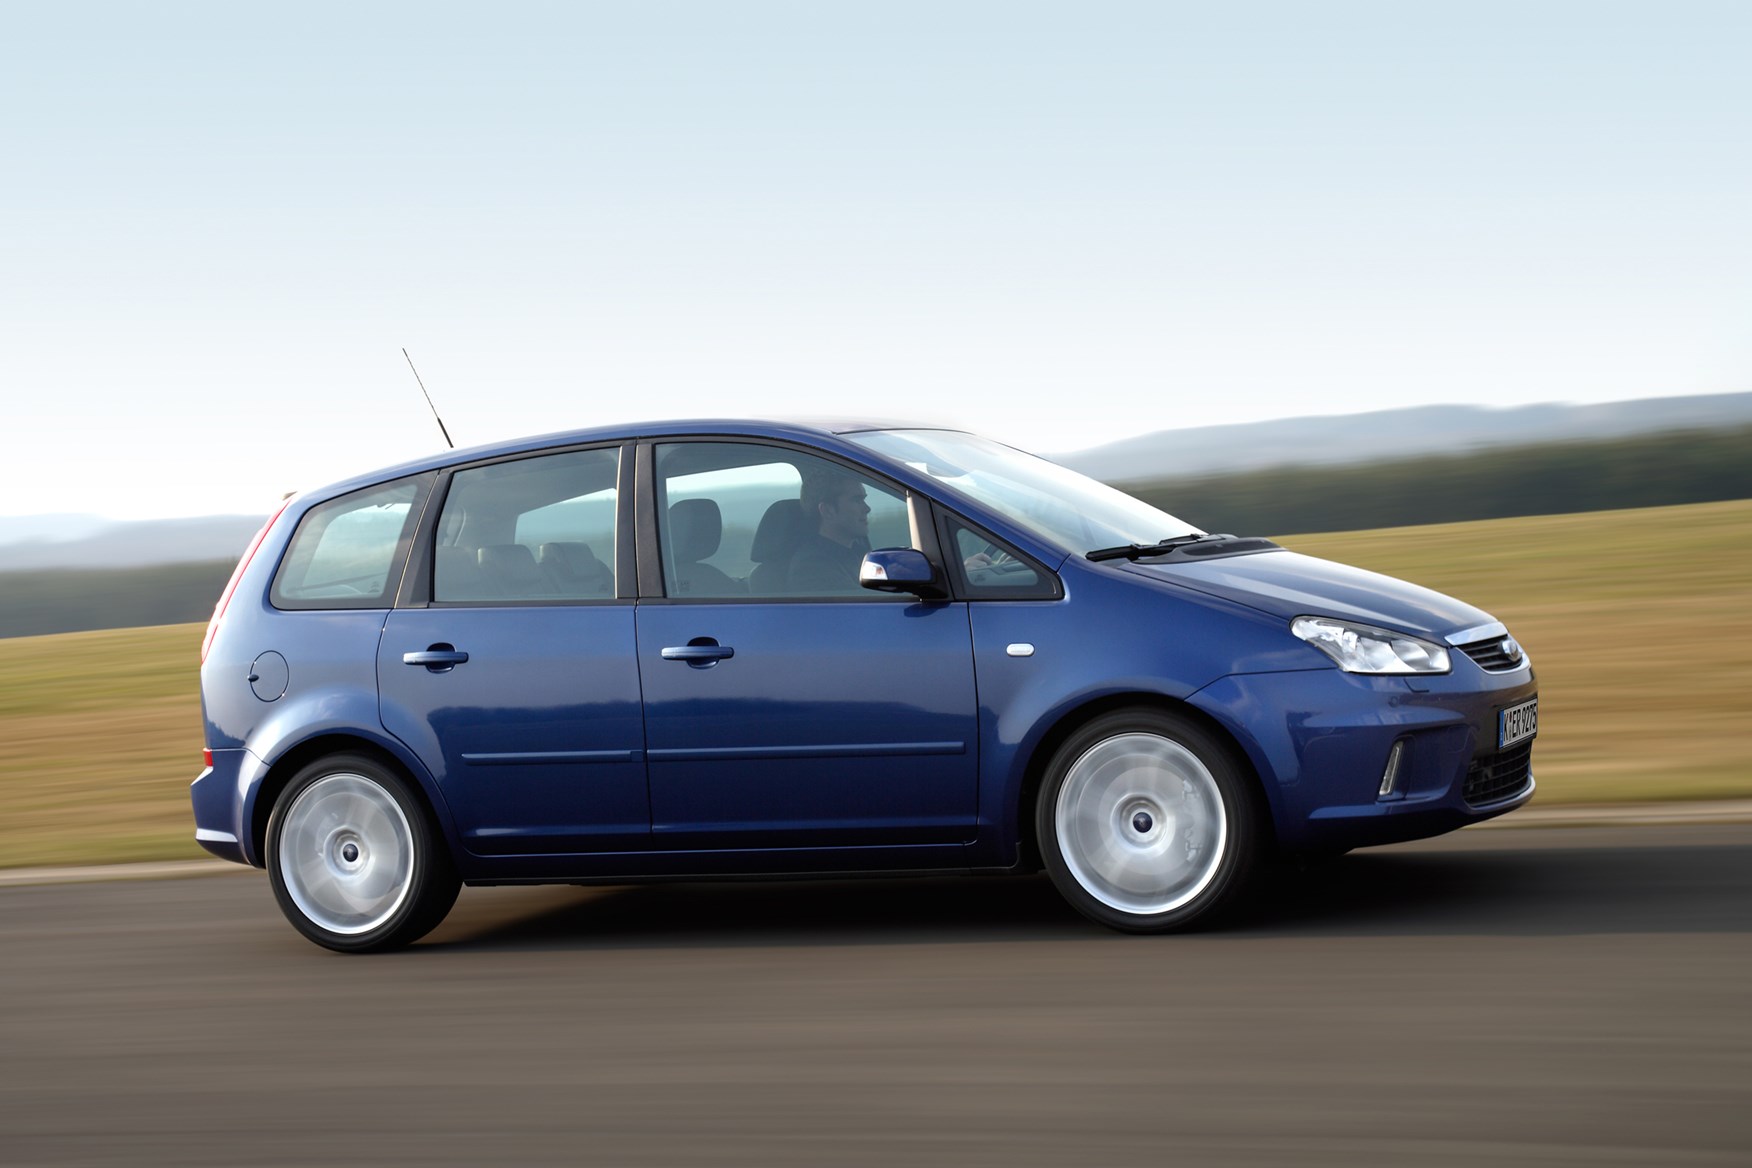 Used Ford Focus CMAX Estate (2003 2010) Review Parkers